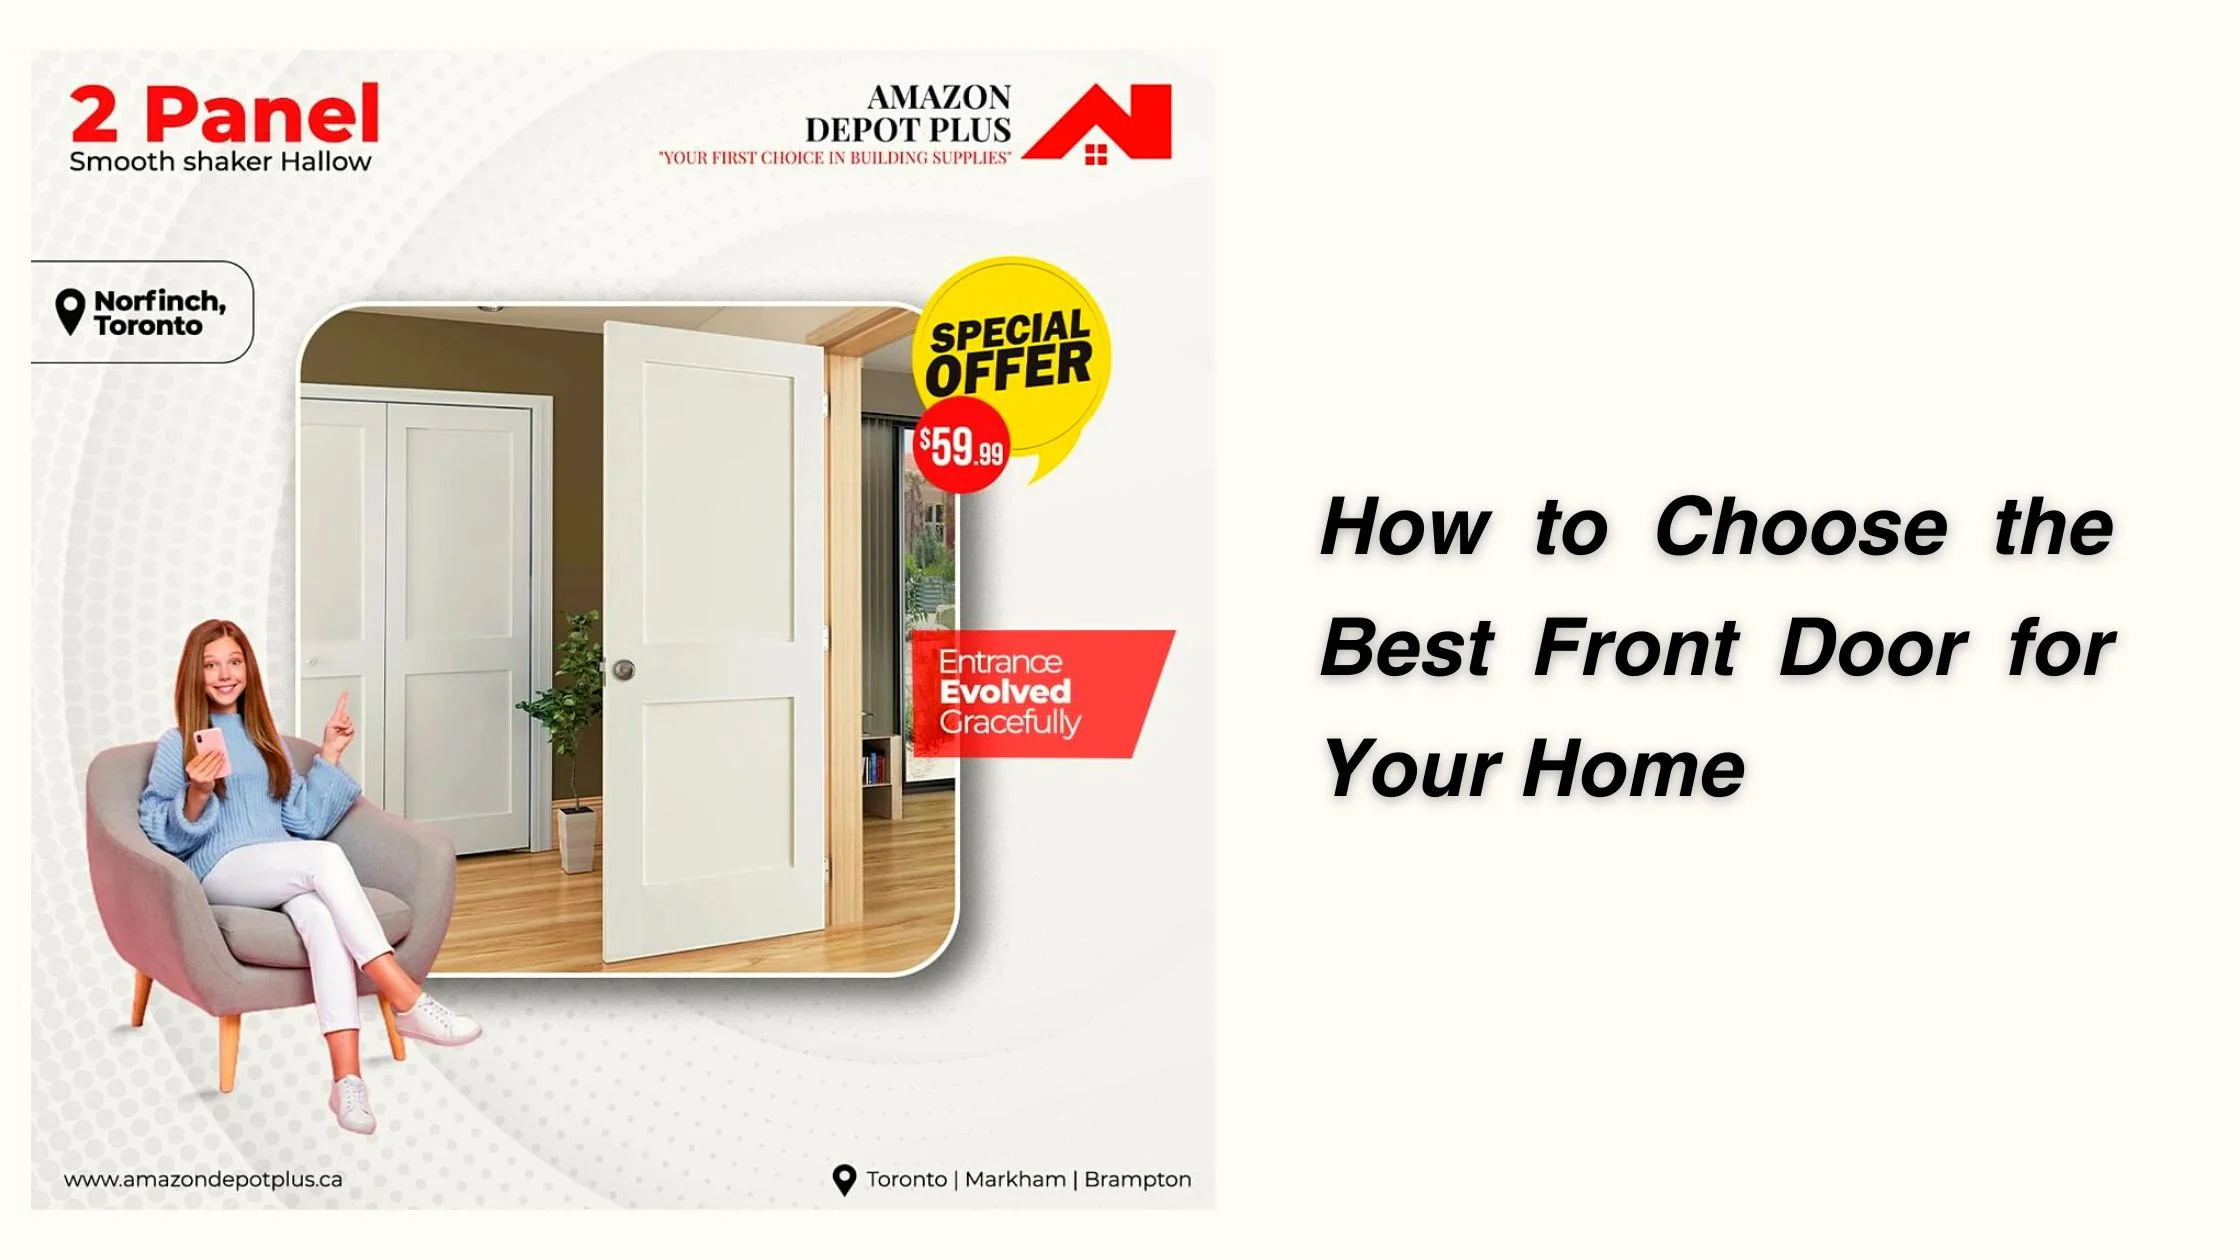 How to Choose the Best Front Door for Your Home